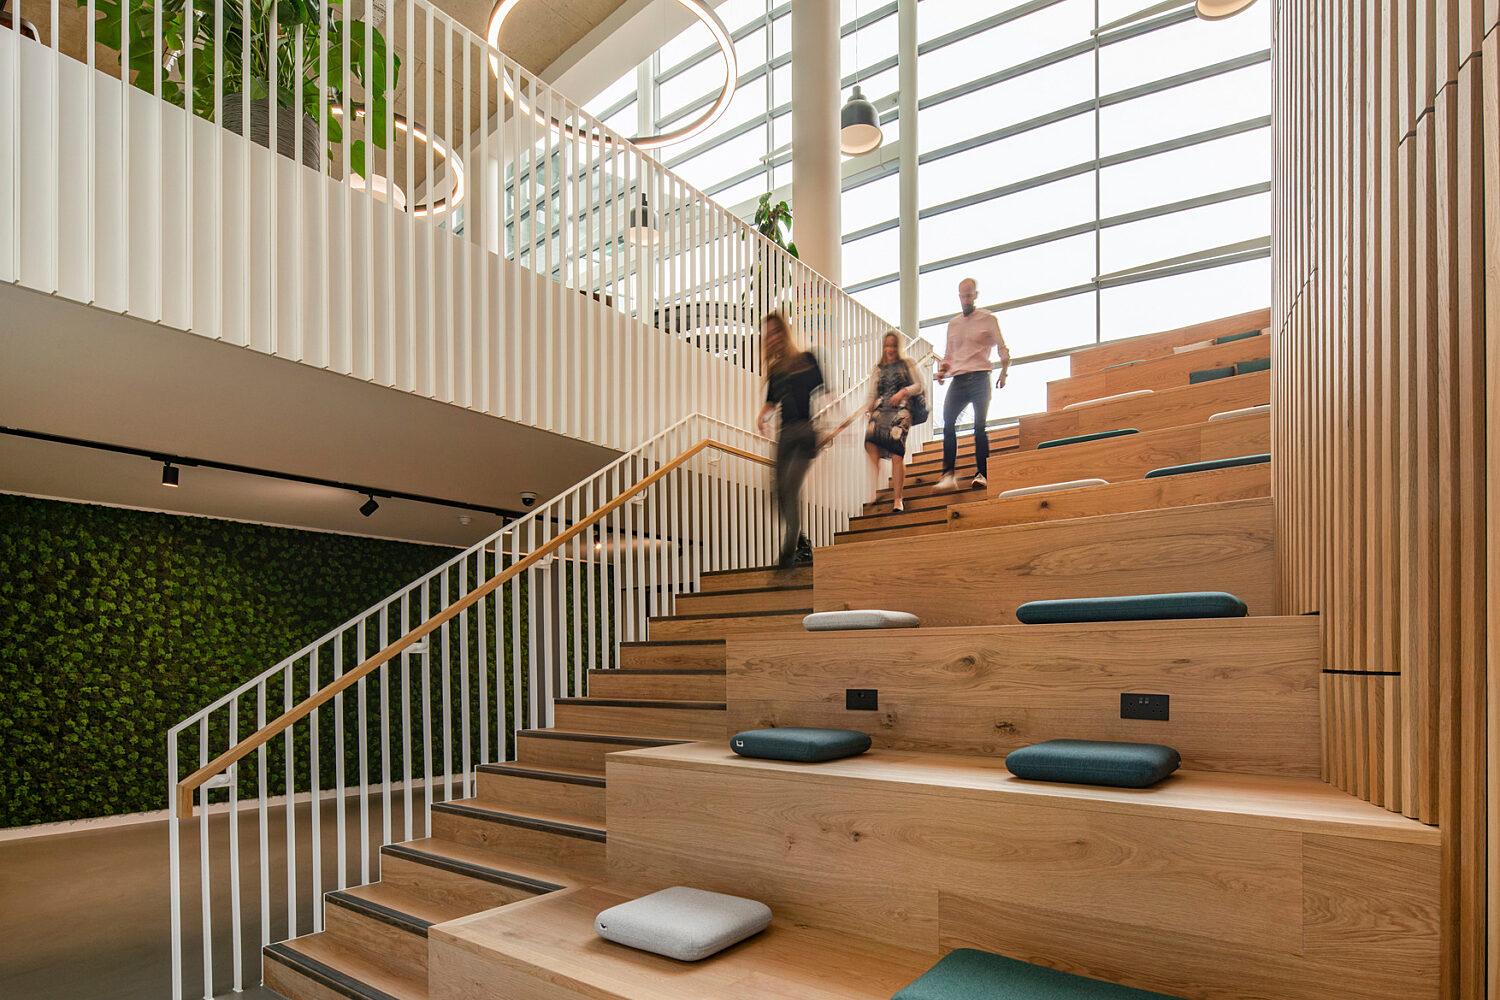 Bespoke oak lecture style seating runs parallel to stairs